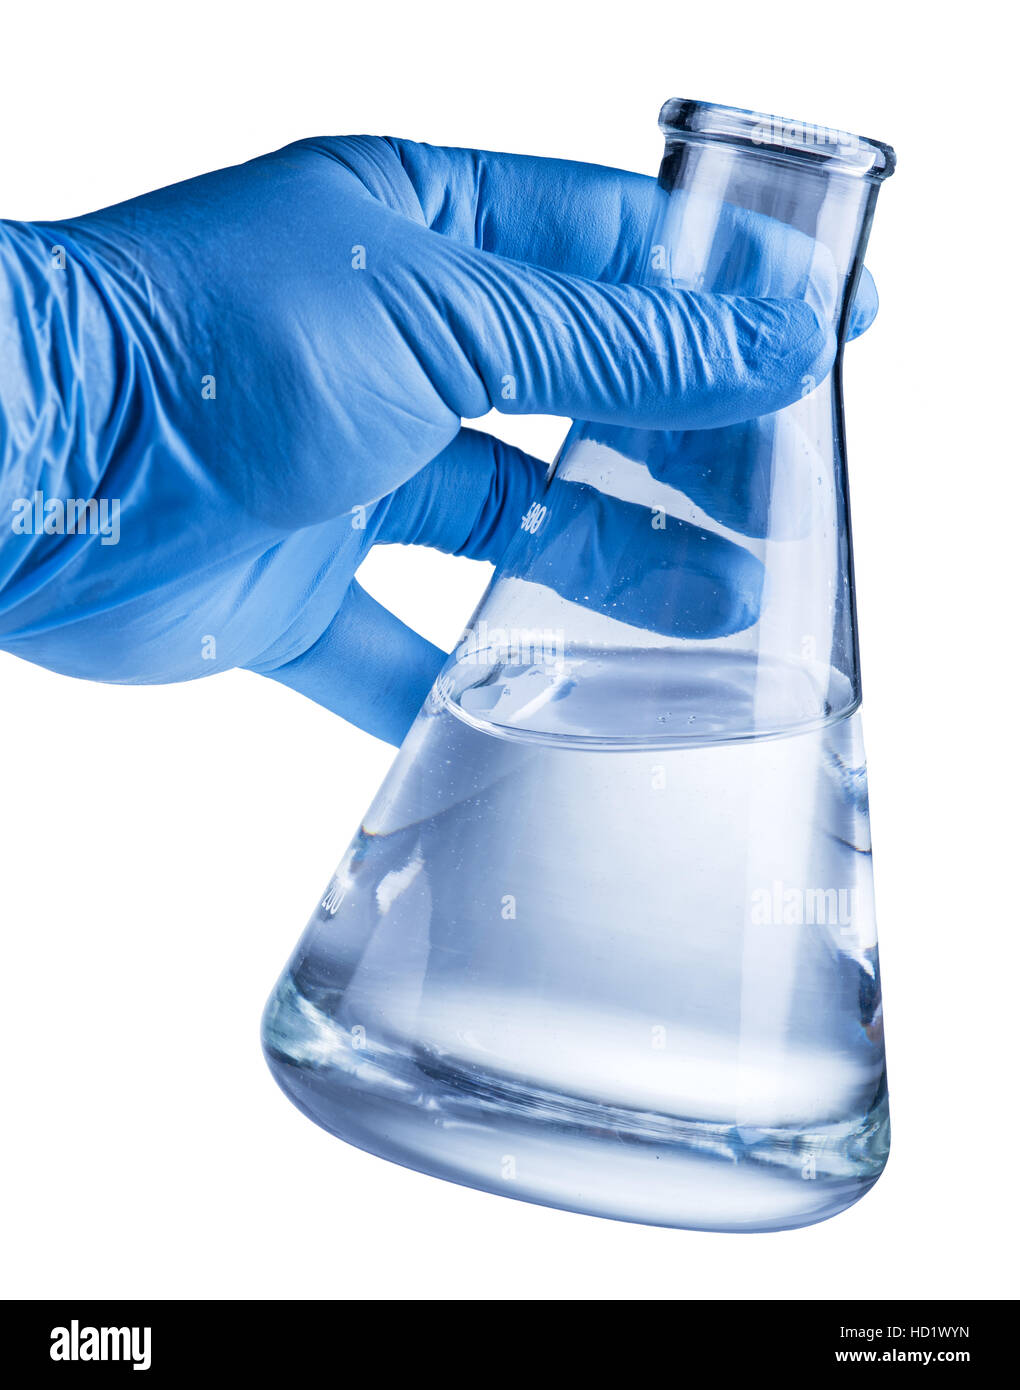 Laboratory beaker in analyst's hand in plastic glove. File contains clipping paths. Stock Photo